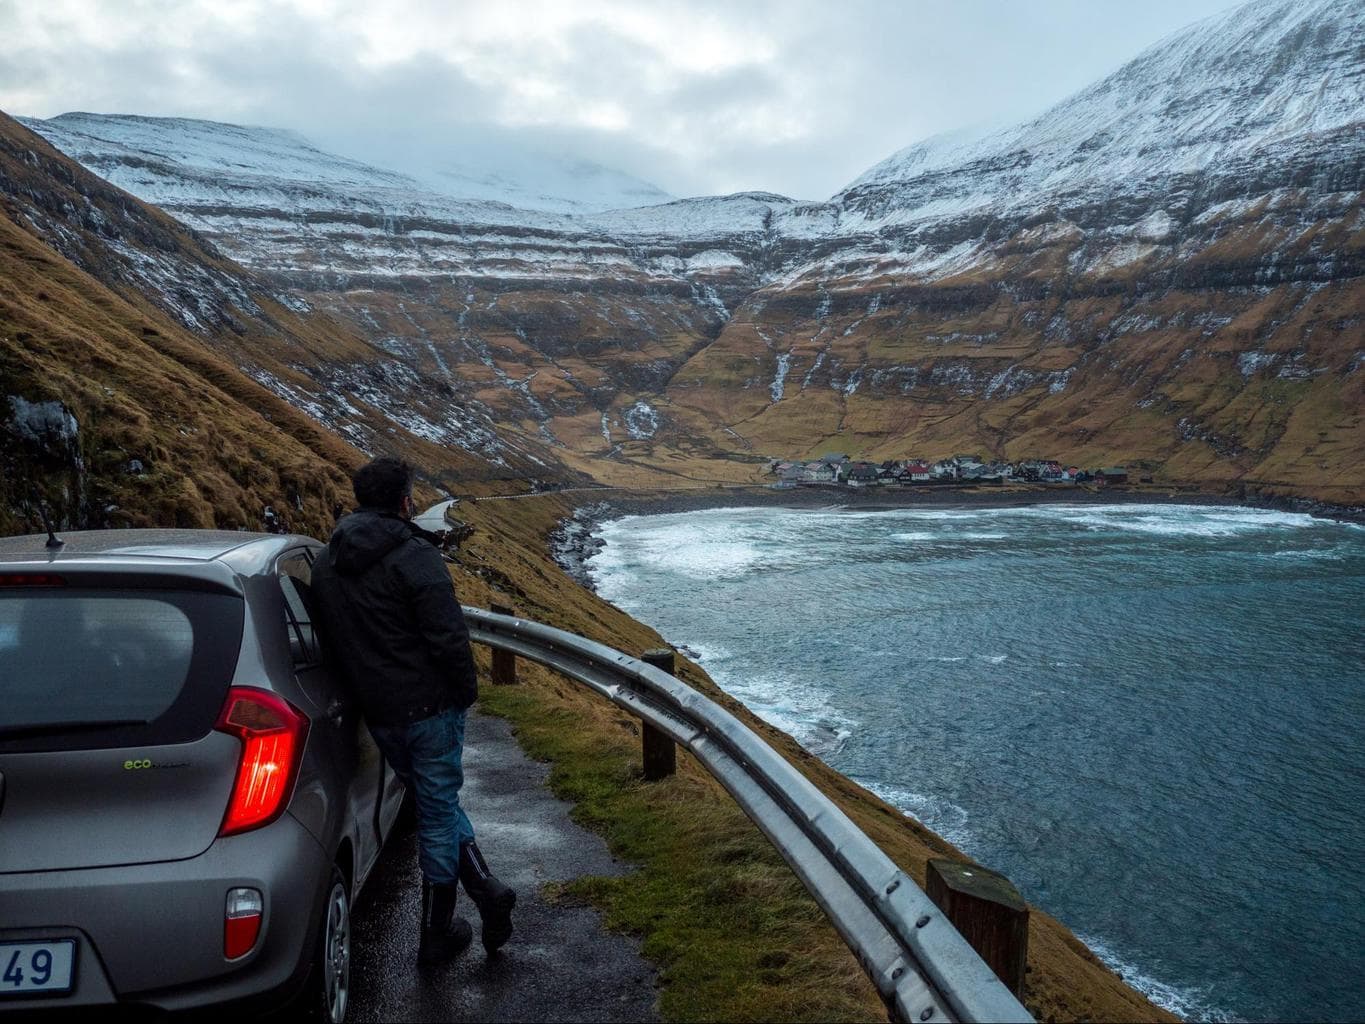 Road rules and car rentals in the Faroe Islands